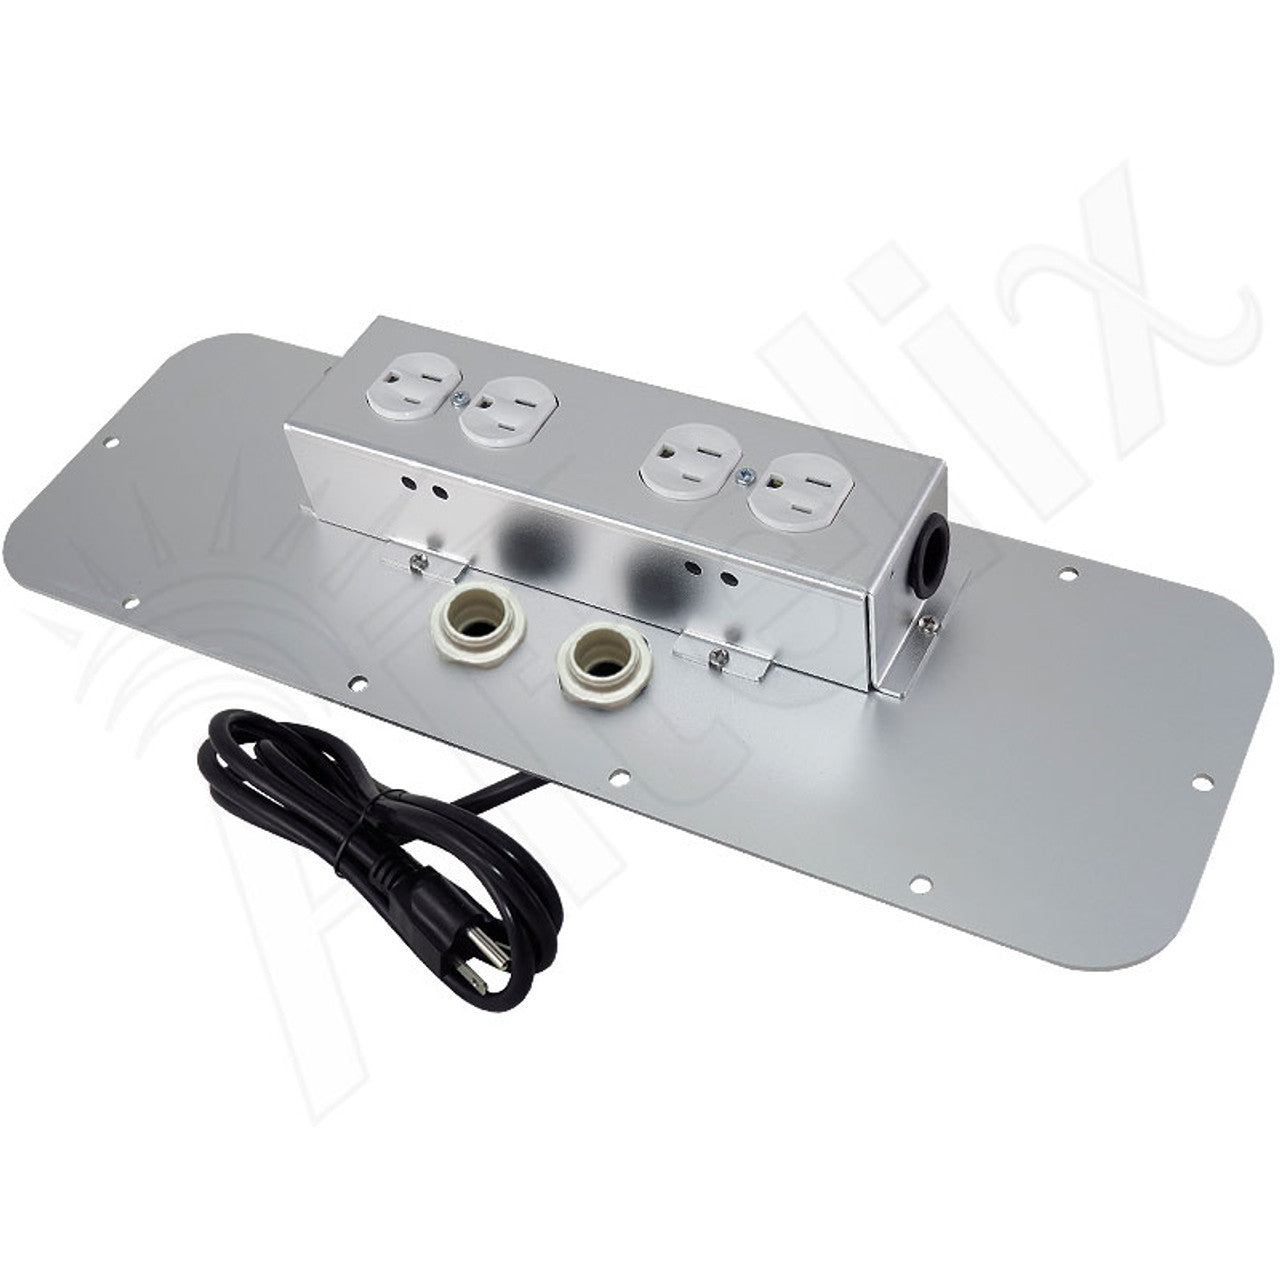 Power Module with 120VAC Outlets for NS242012, NS242412, NS242416, NX242416, NS242424, NS282416 and NS322416 Enclosures